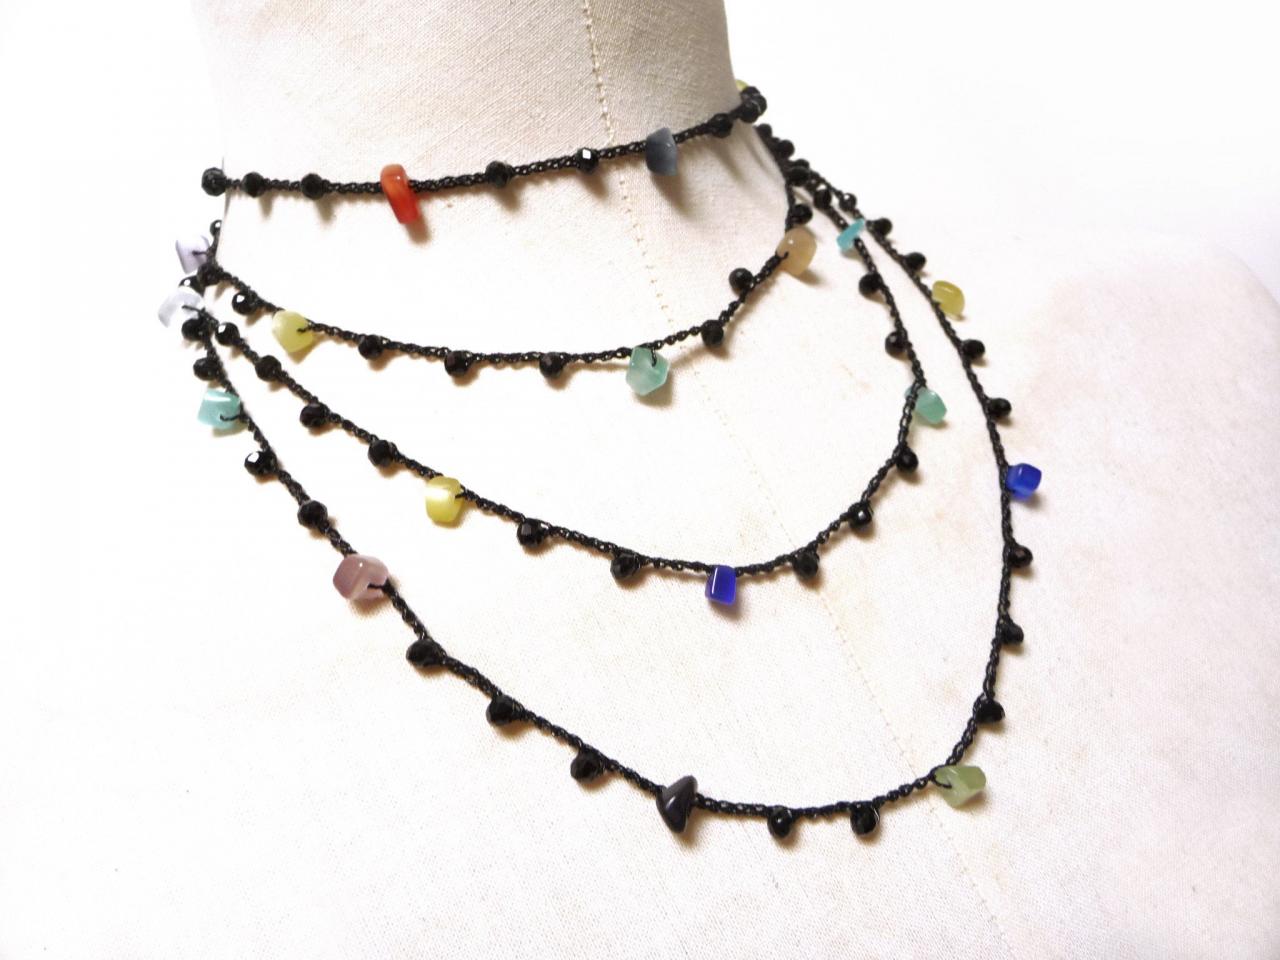 Long Beaded Necklace With Black Crystals And Multicolor Gemstone Chips, Crochet Rosary Necklace